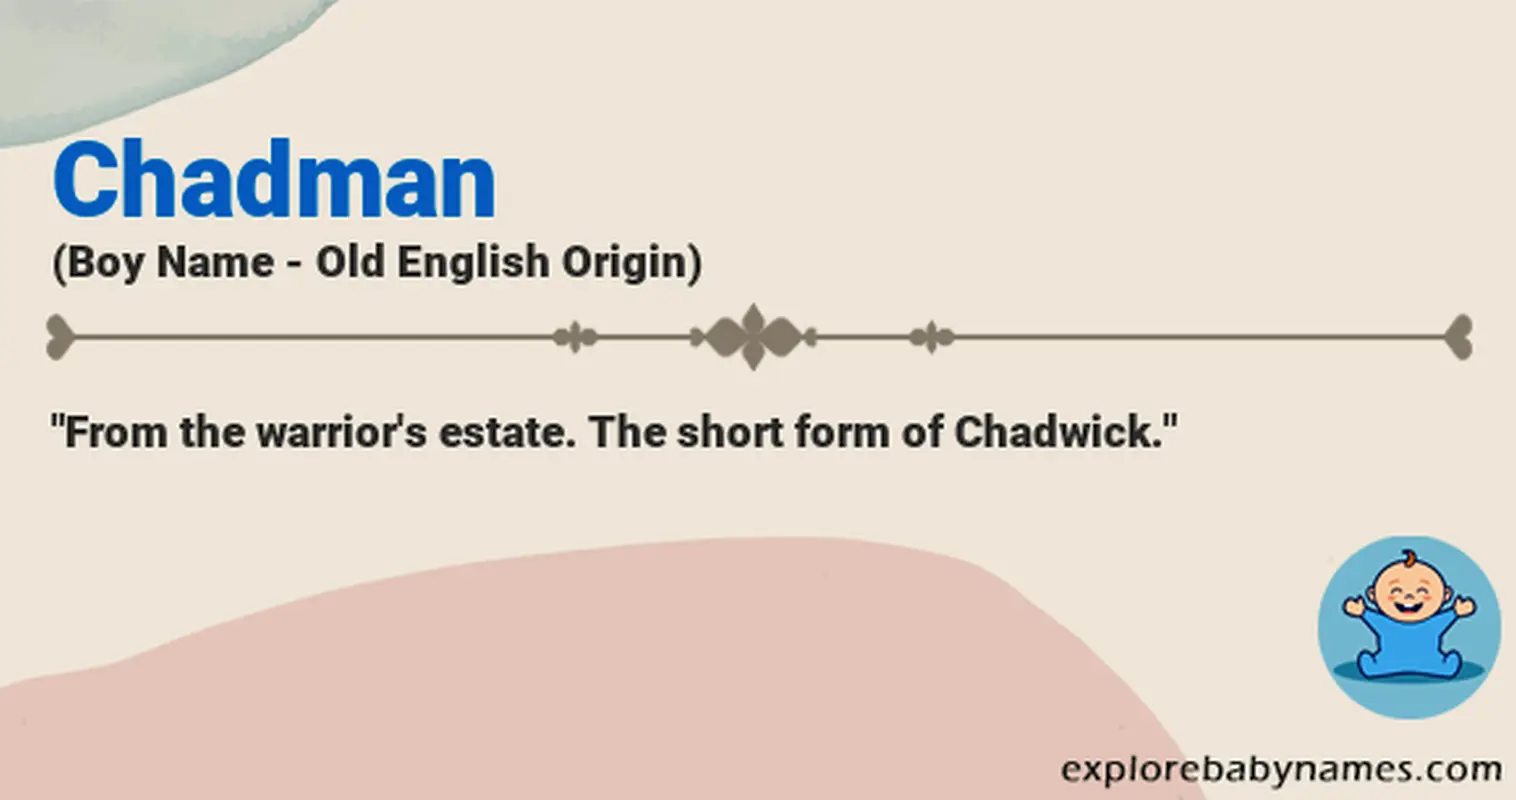 Meaning of Chadman